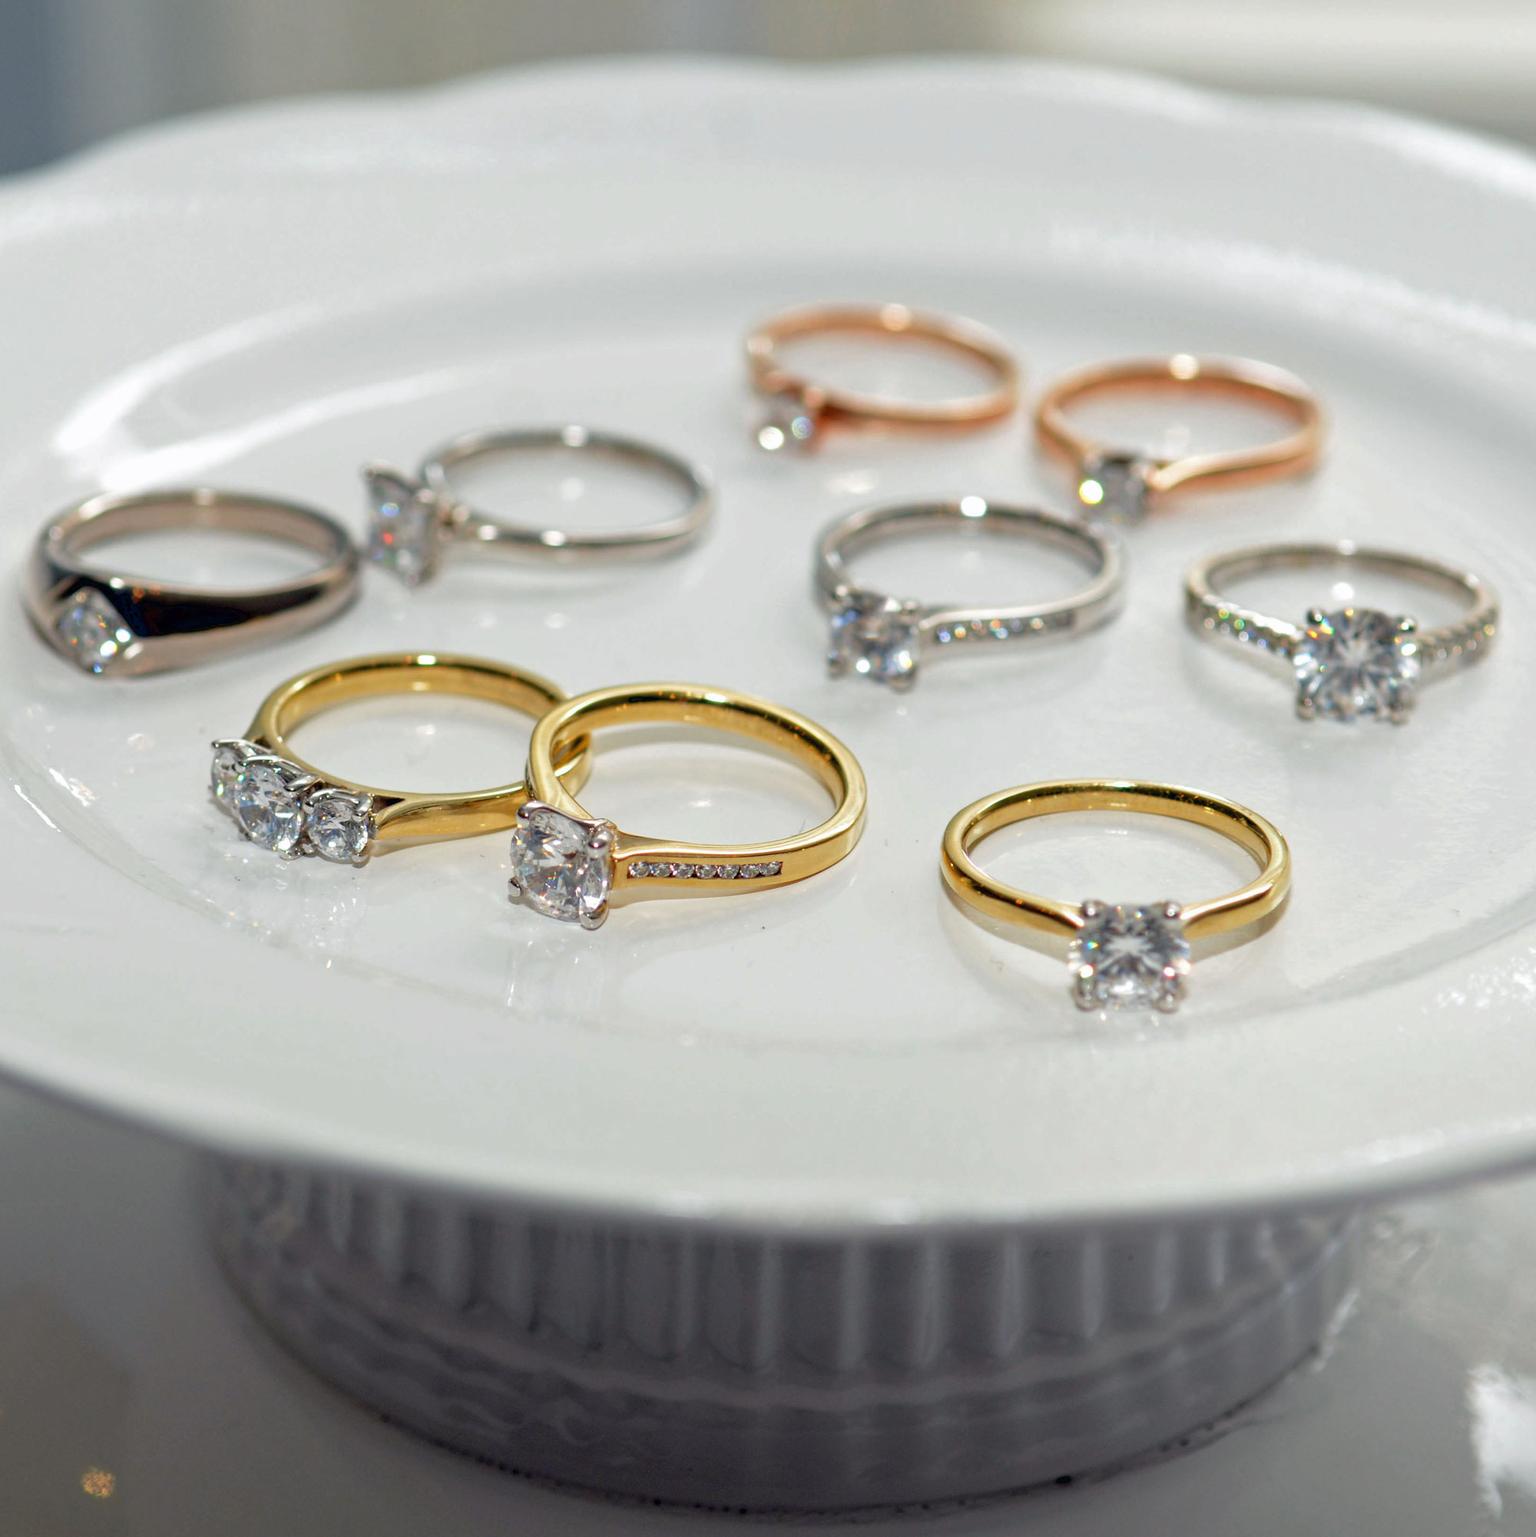 Arctic Circle Fairtrade gold and Canadian diamond engagement rings